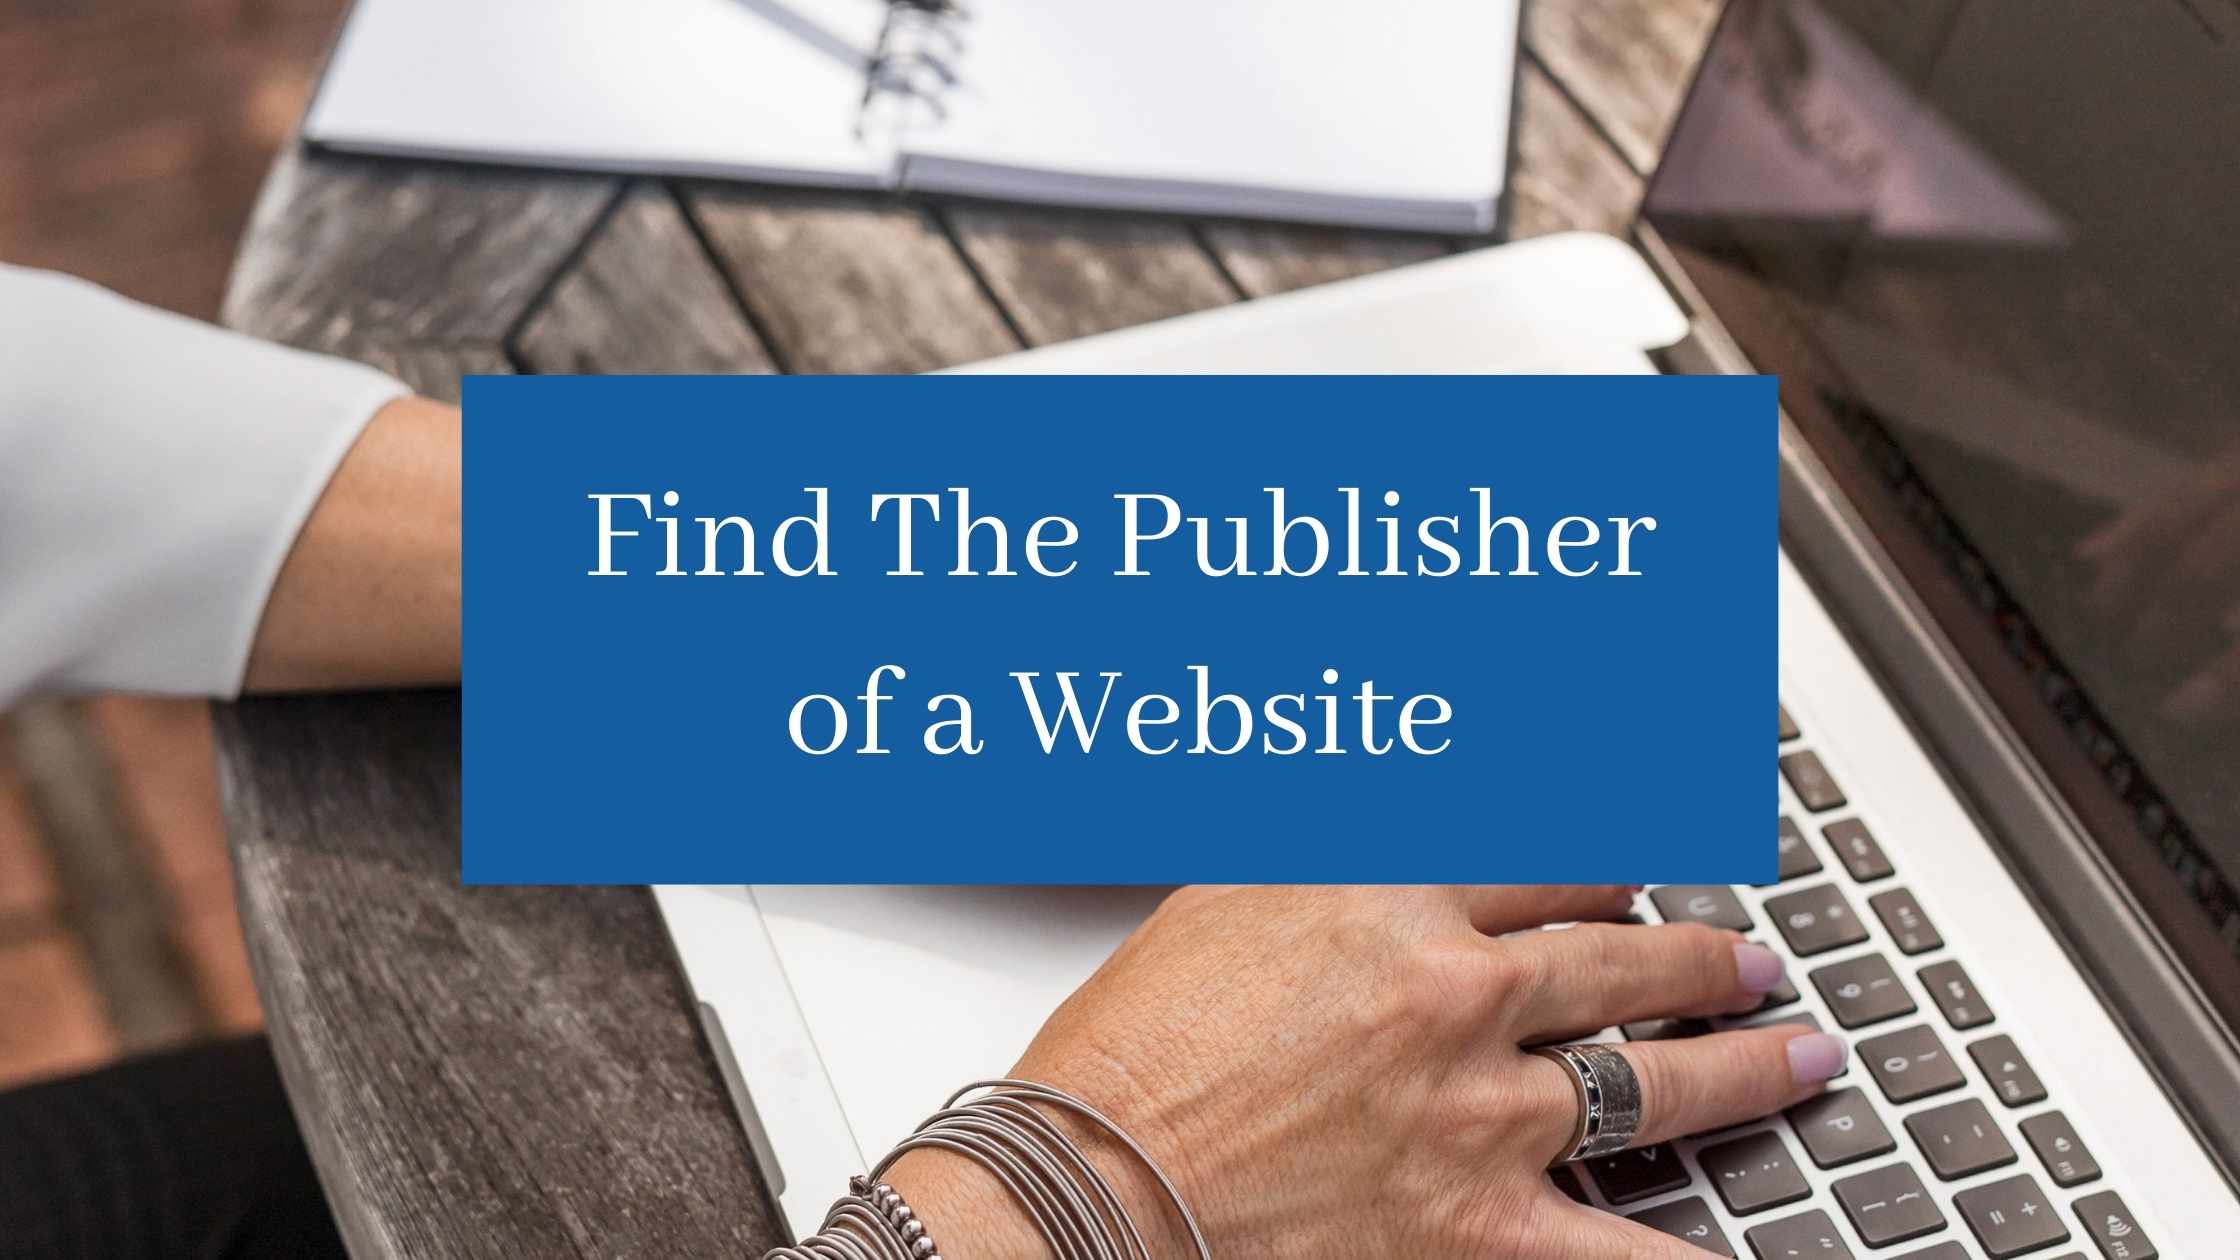 5 Ways To Find The Publisher Of a Website